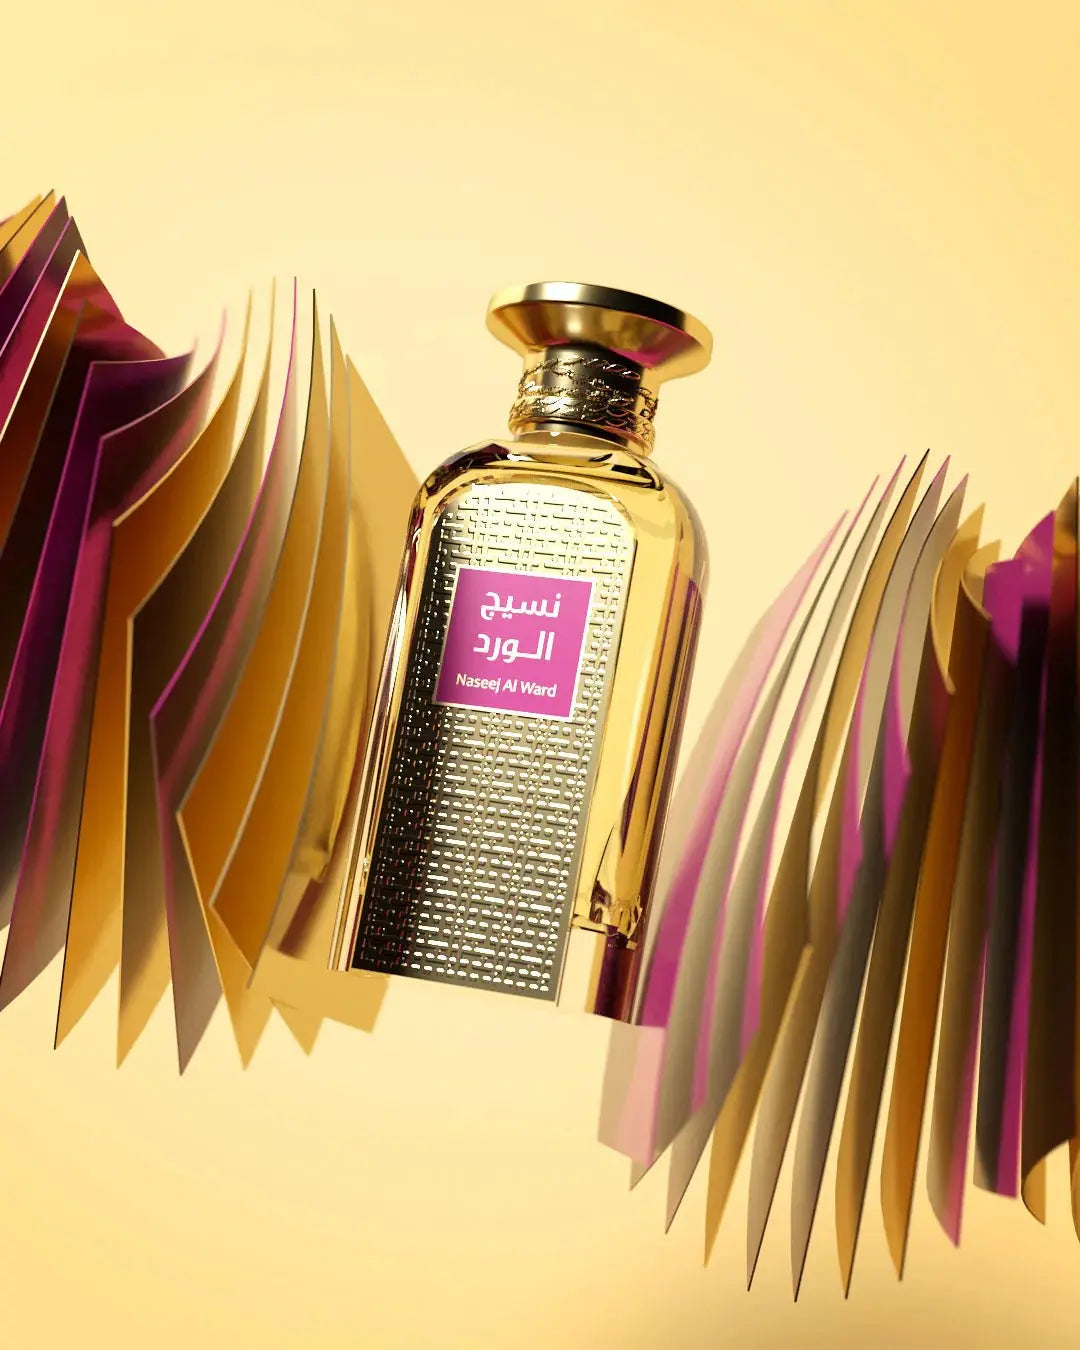 The image shows a tall, rectangular glass perfume bottle with a gold cap, against a gradient yellow background. The bottle is flanked by abstract, fan-like paper art in shades of purple, gold, and pink, which creates a dynamic and modern frame around the product.  The combination of the colorful background and the golden accents gives the image a warm, vibrant feel, suggestive of luxury and style.